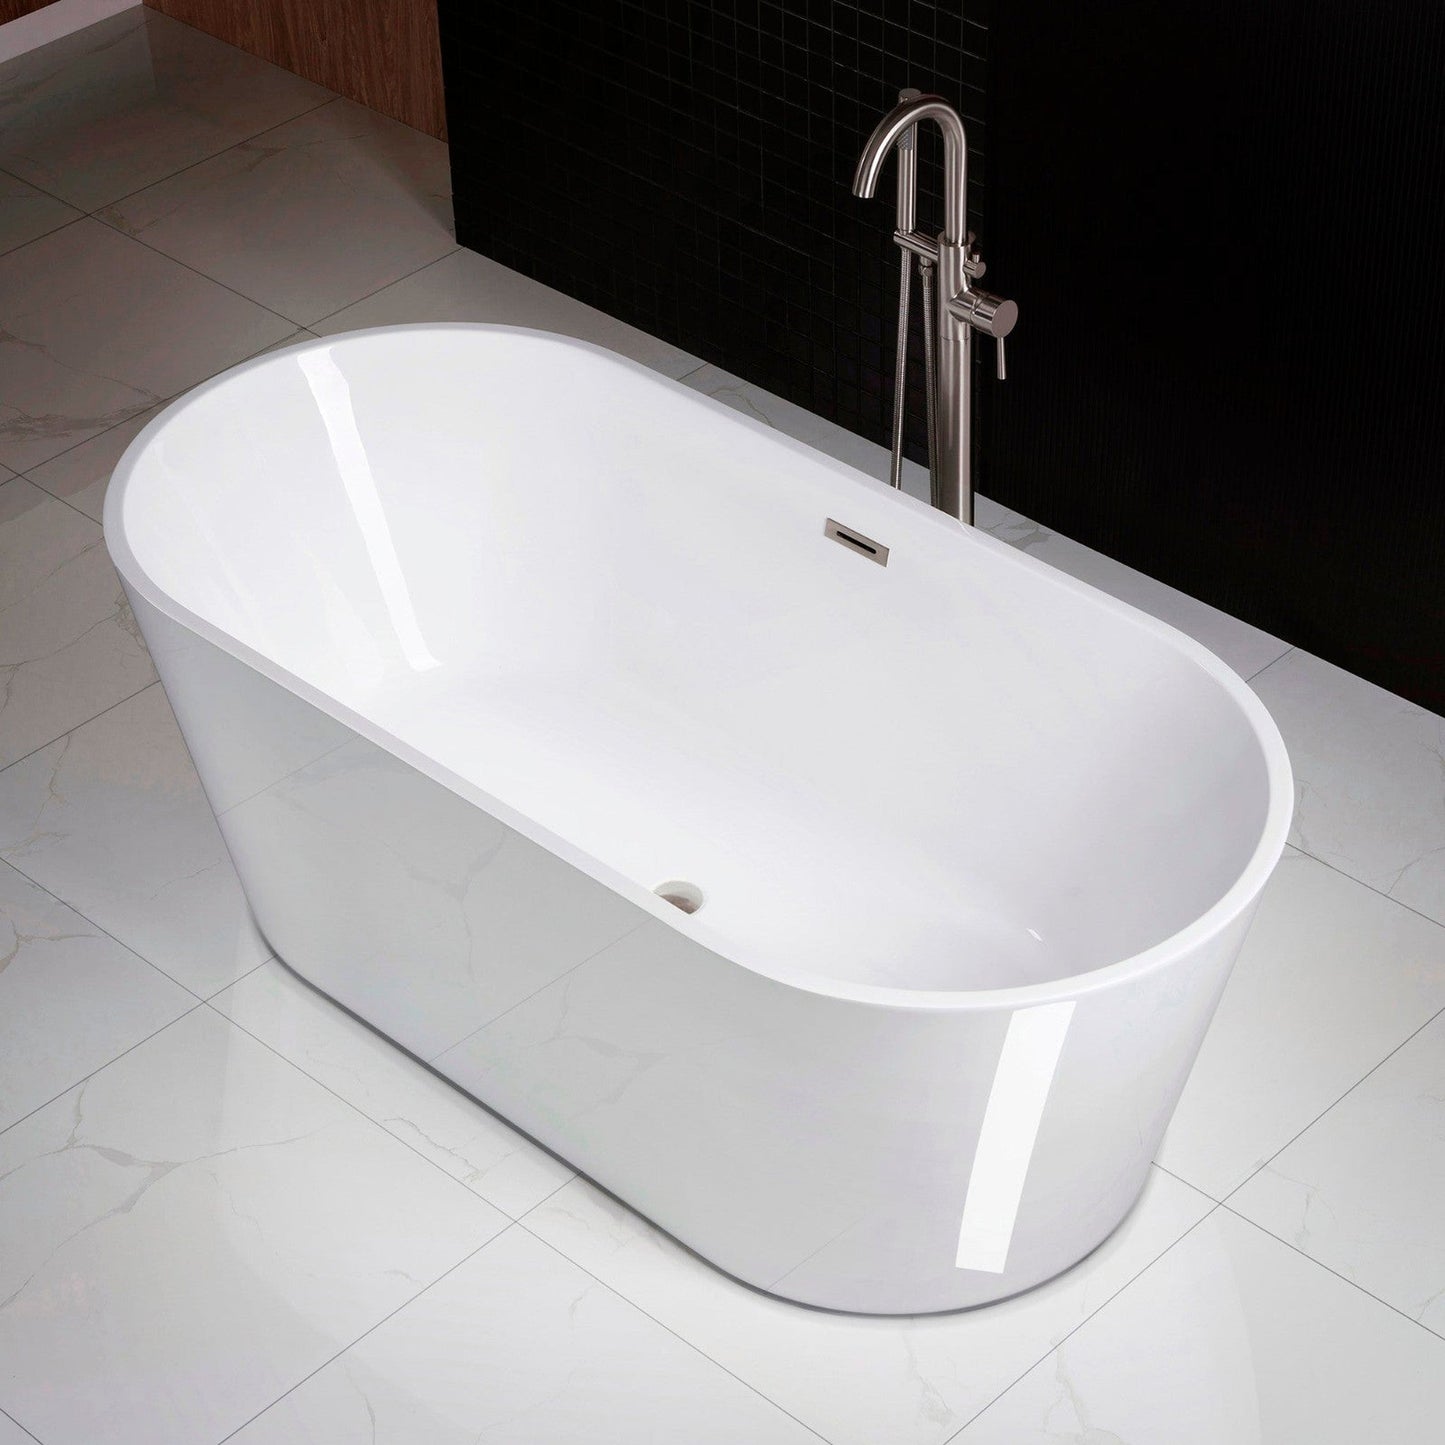 WoodBridge 71" White Acrylic Freestanding Contemporary Soaking Bathtub With Brushed Nickel Drain, Overflow, F0040BN Tub Filler and Caddy Tray